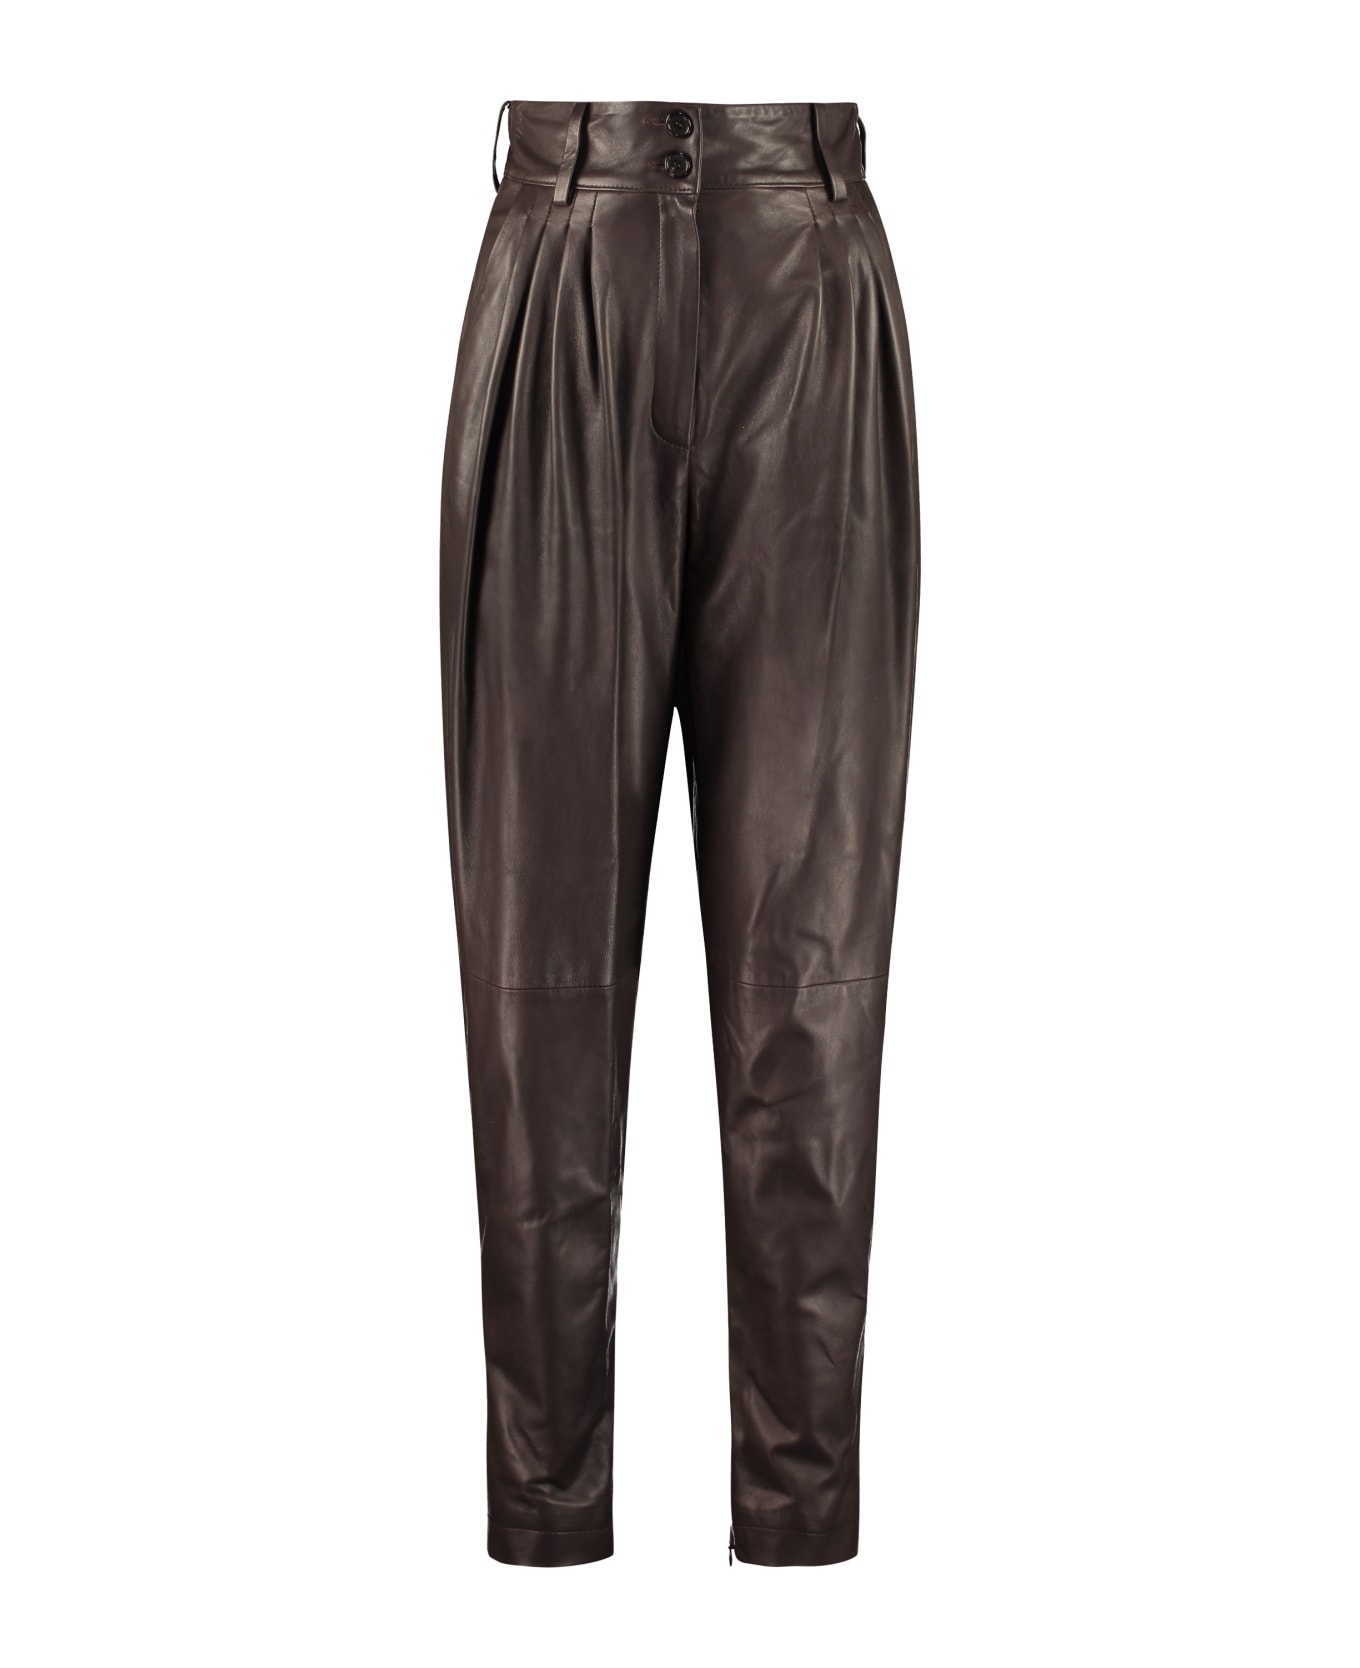 Dolce & Gabbana Leather Pants - brown ボトムス